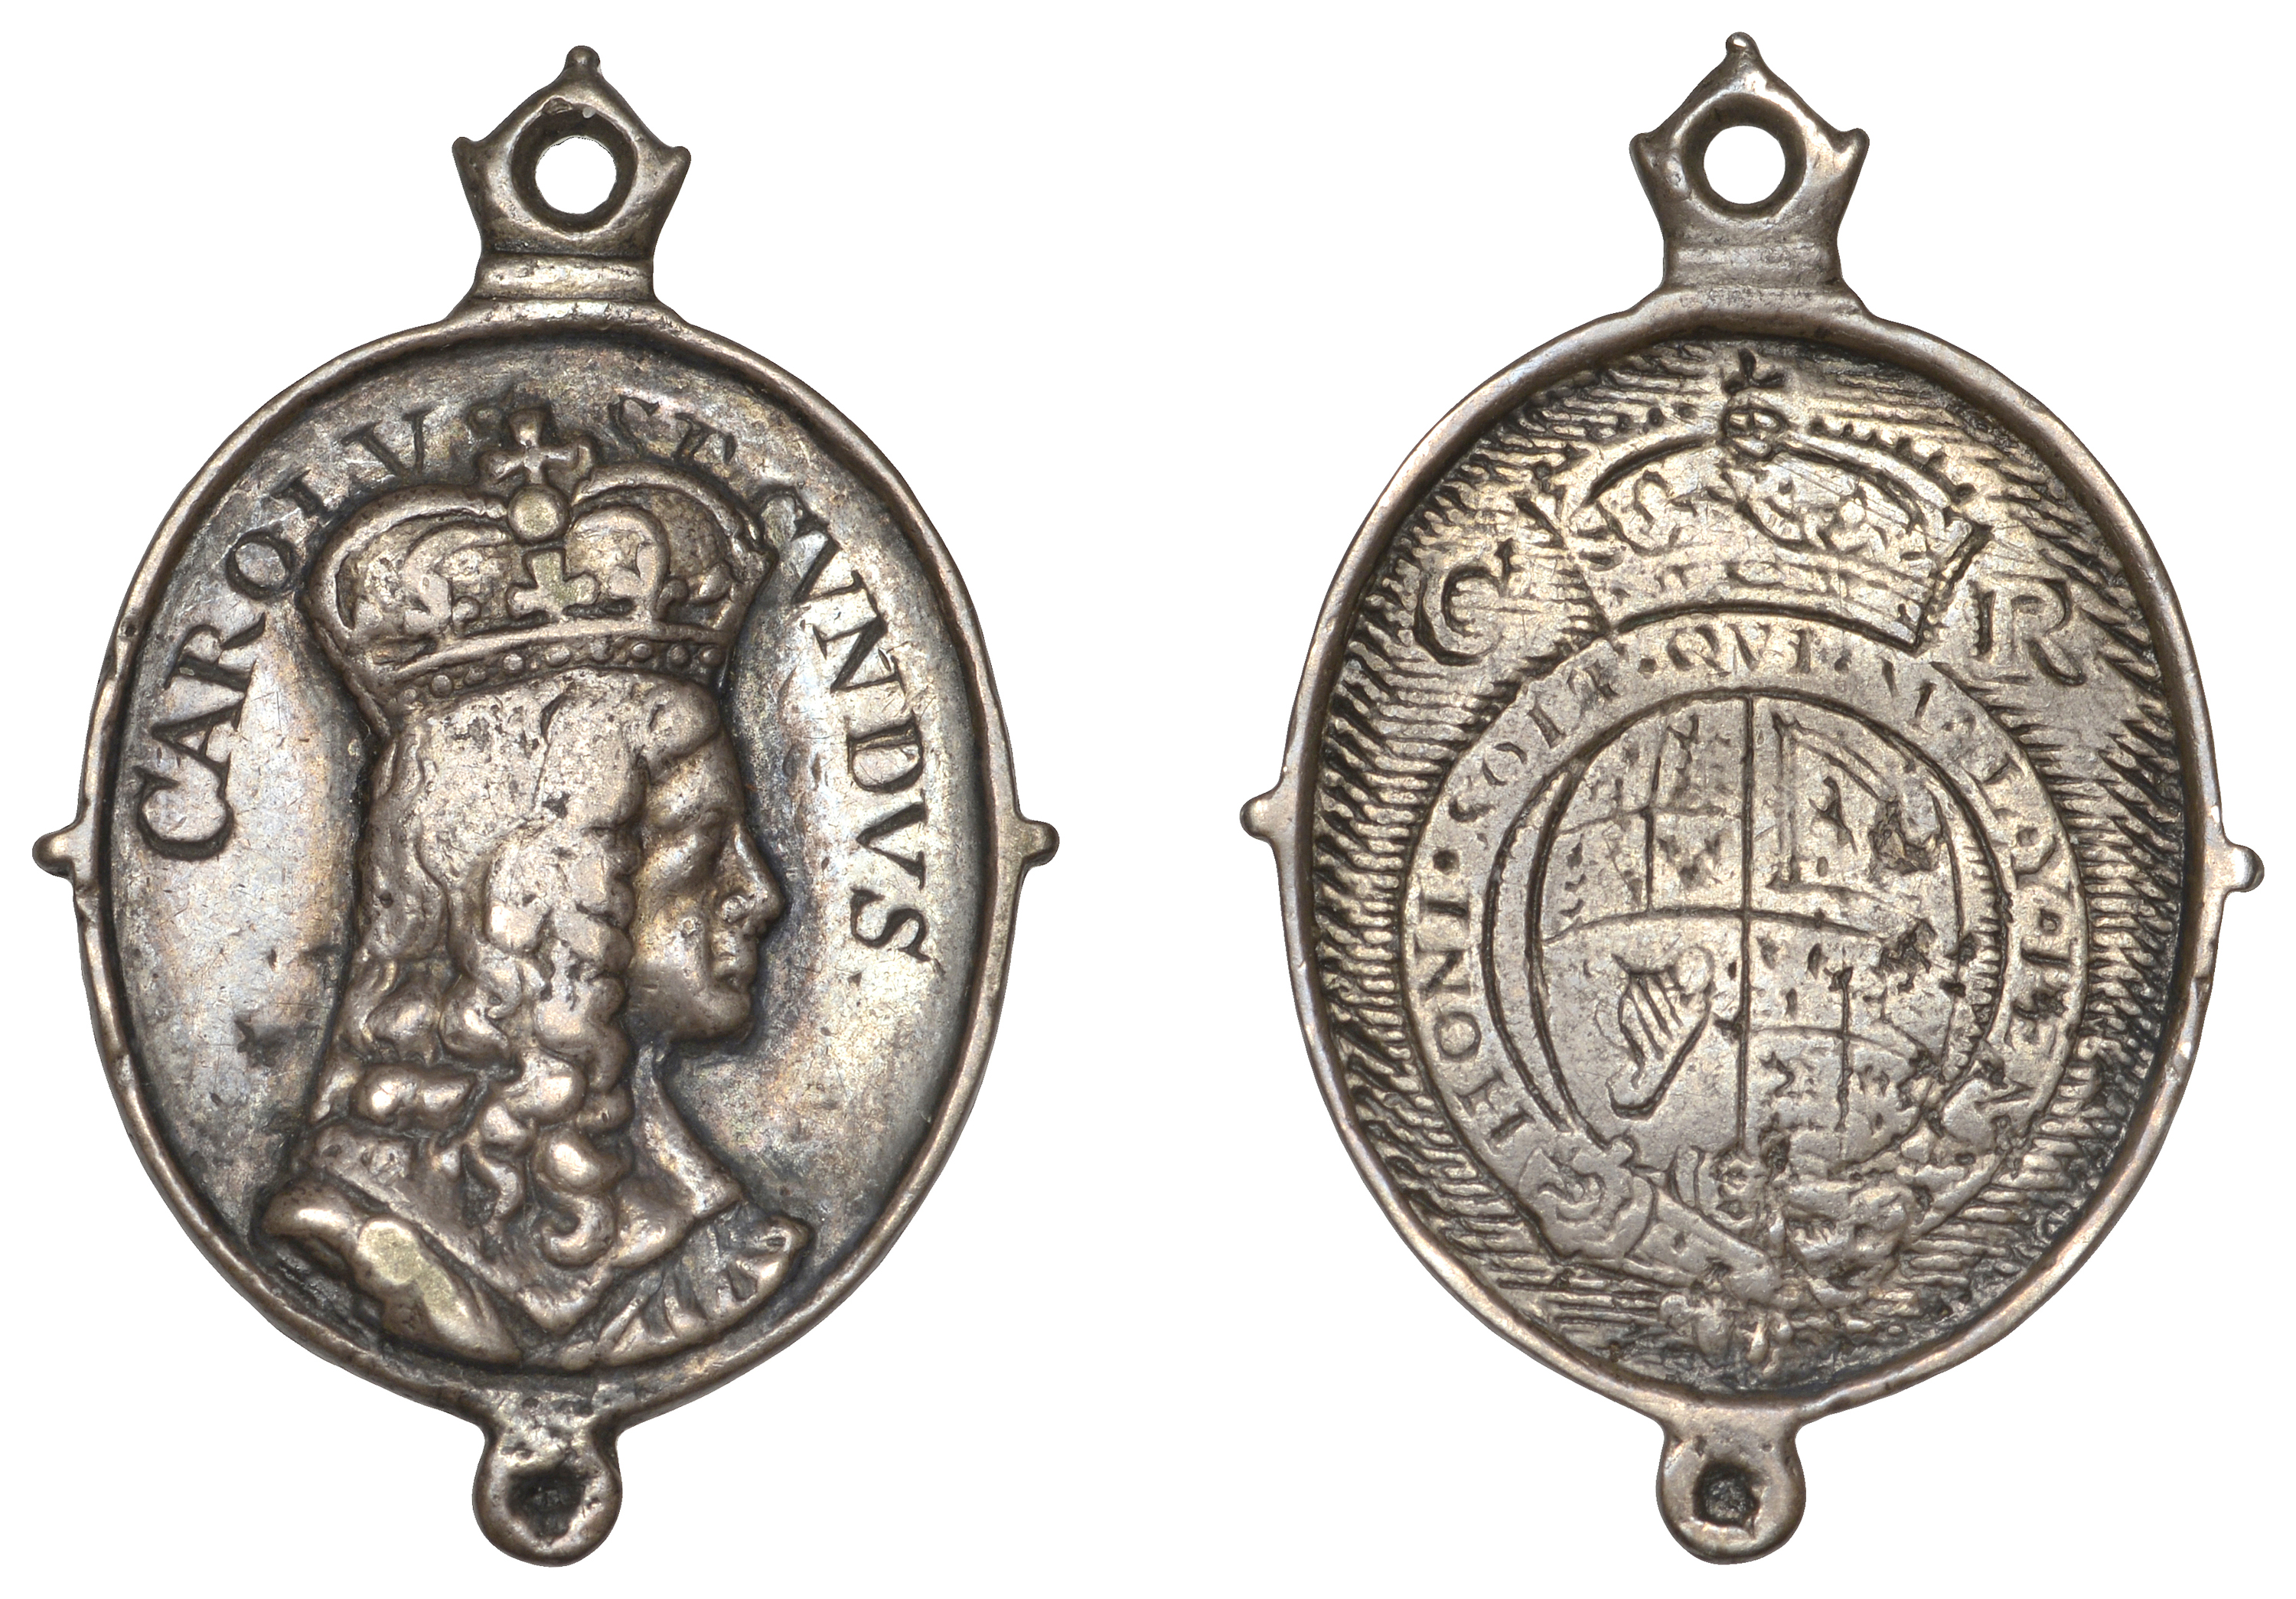 Charles II, a silver Royalist badge, unsigned, bust right wearing large crown, carolus secun...